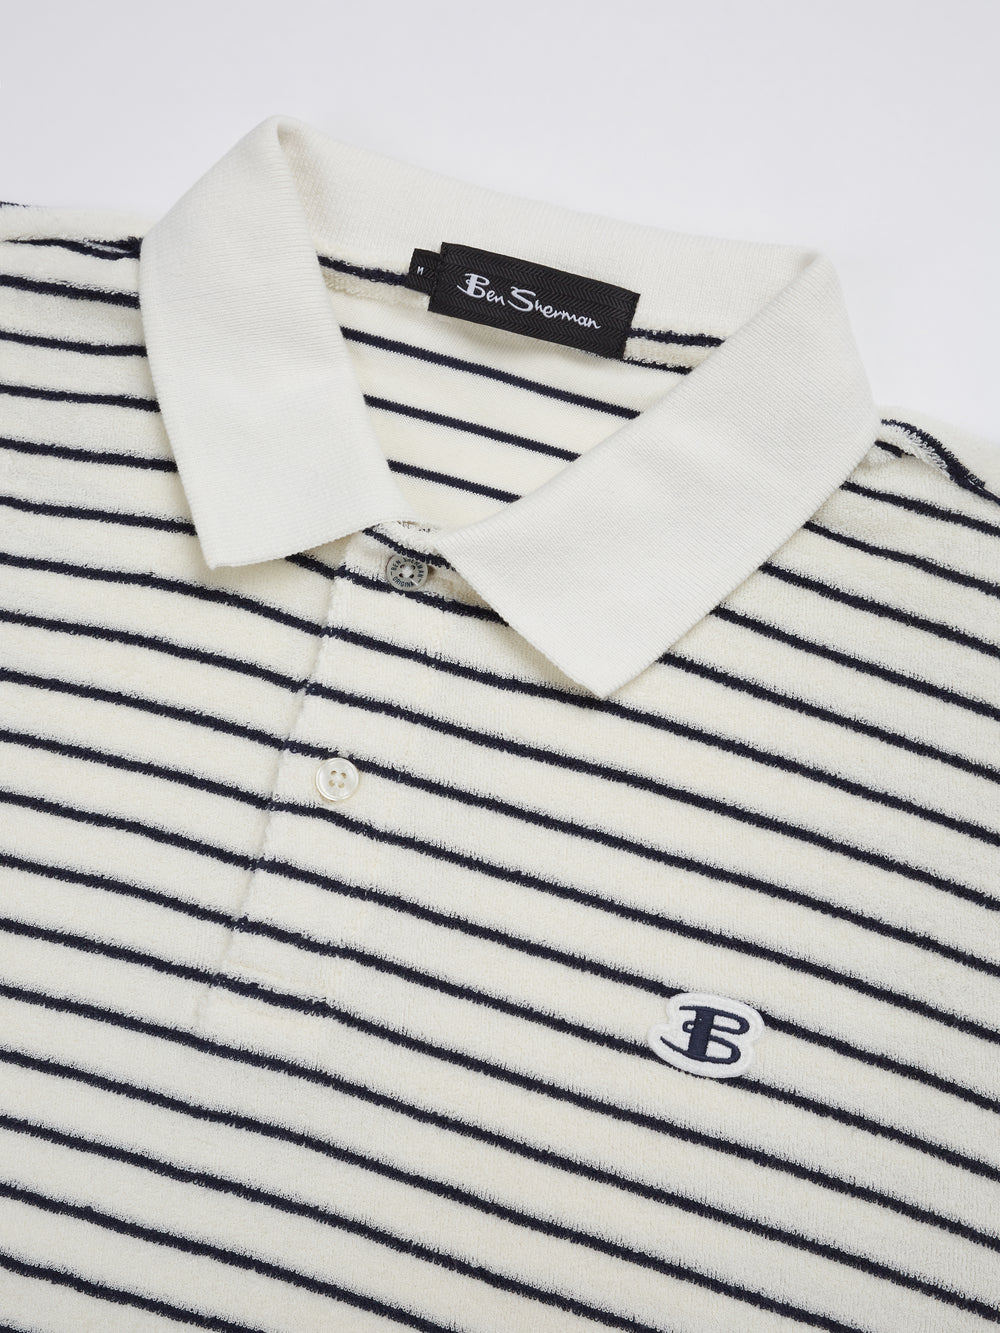 B by Ben Sherman Striped Toweling-Texture Polo